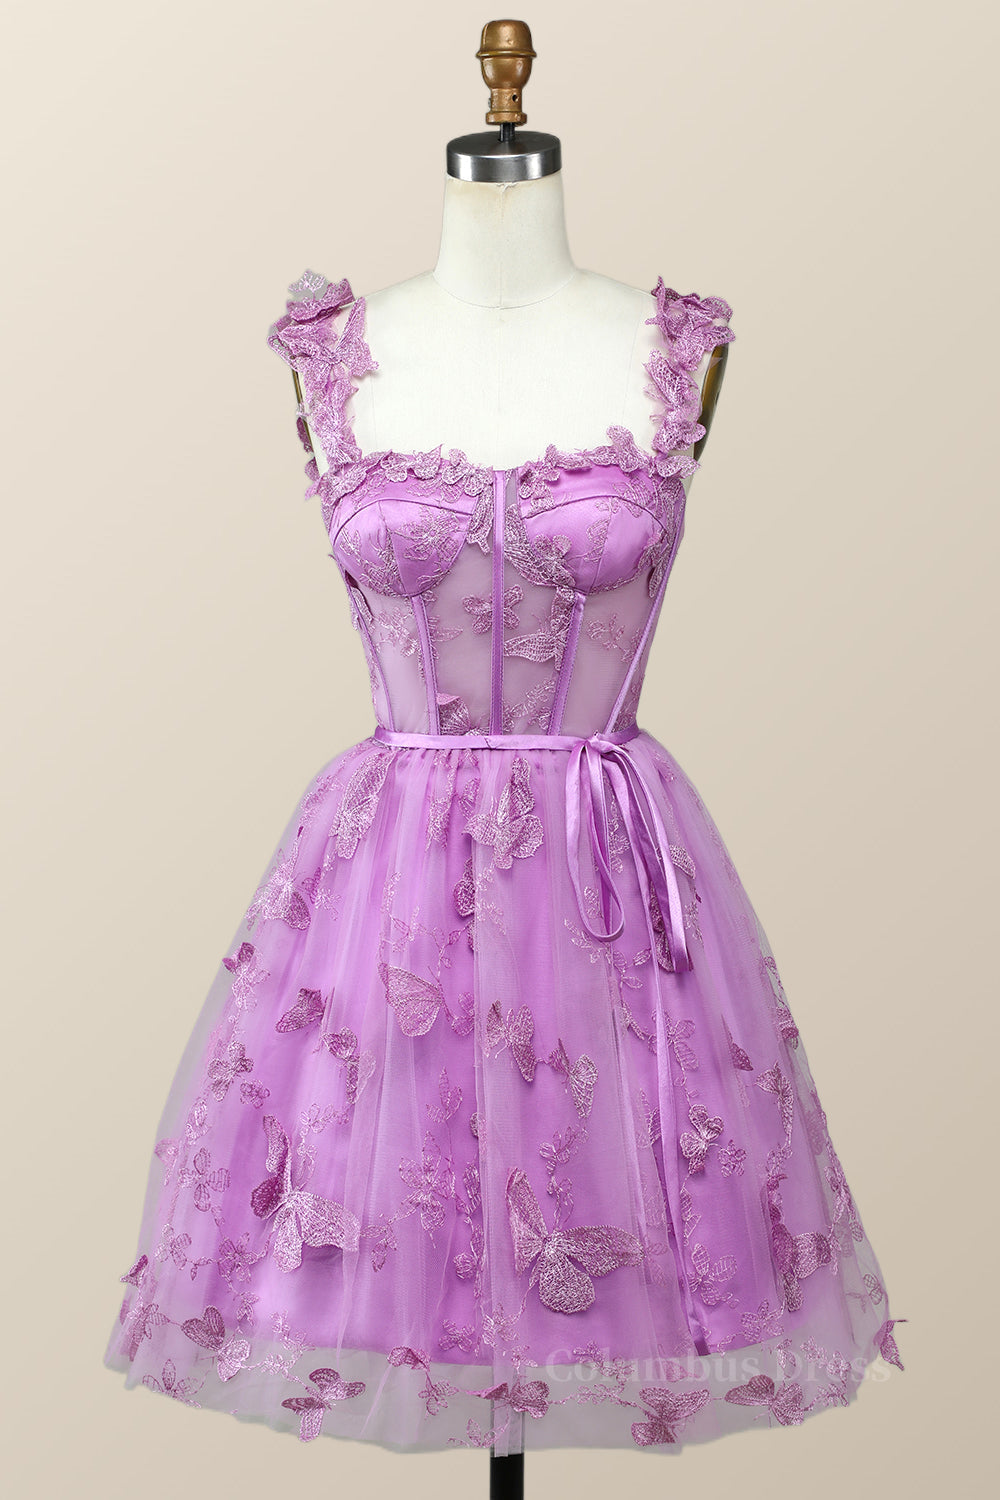 Beauty Dress, Lilac Butterfly Tulle A-line Short Homecoming Dress